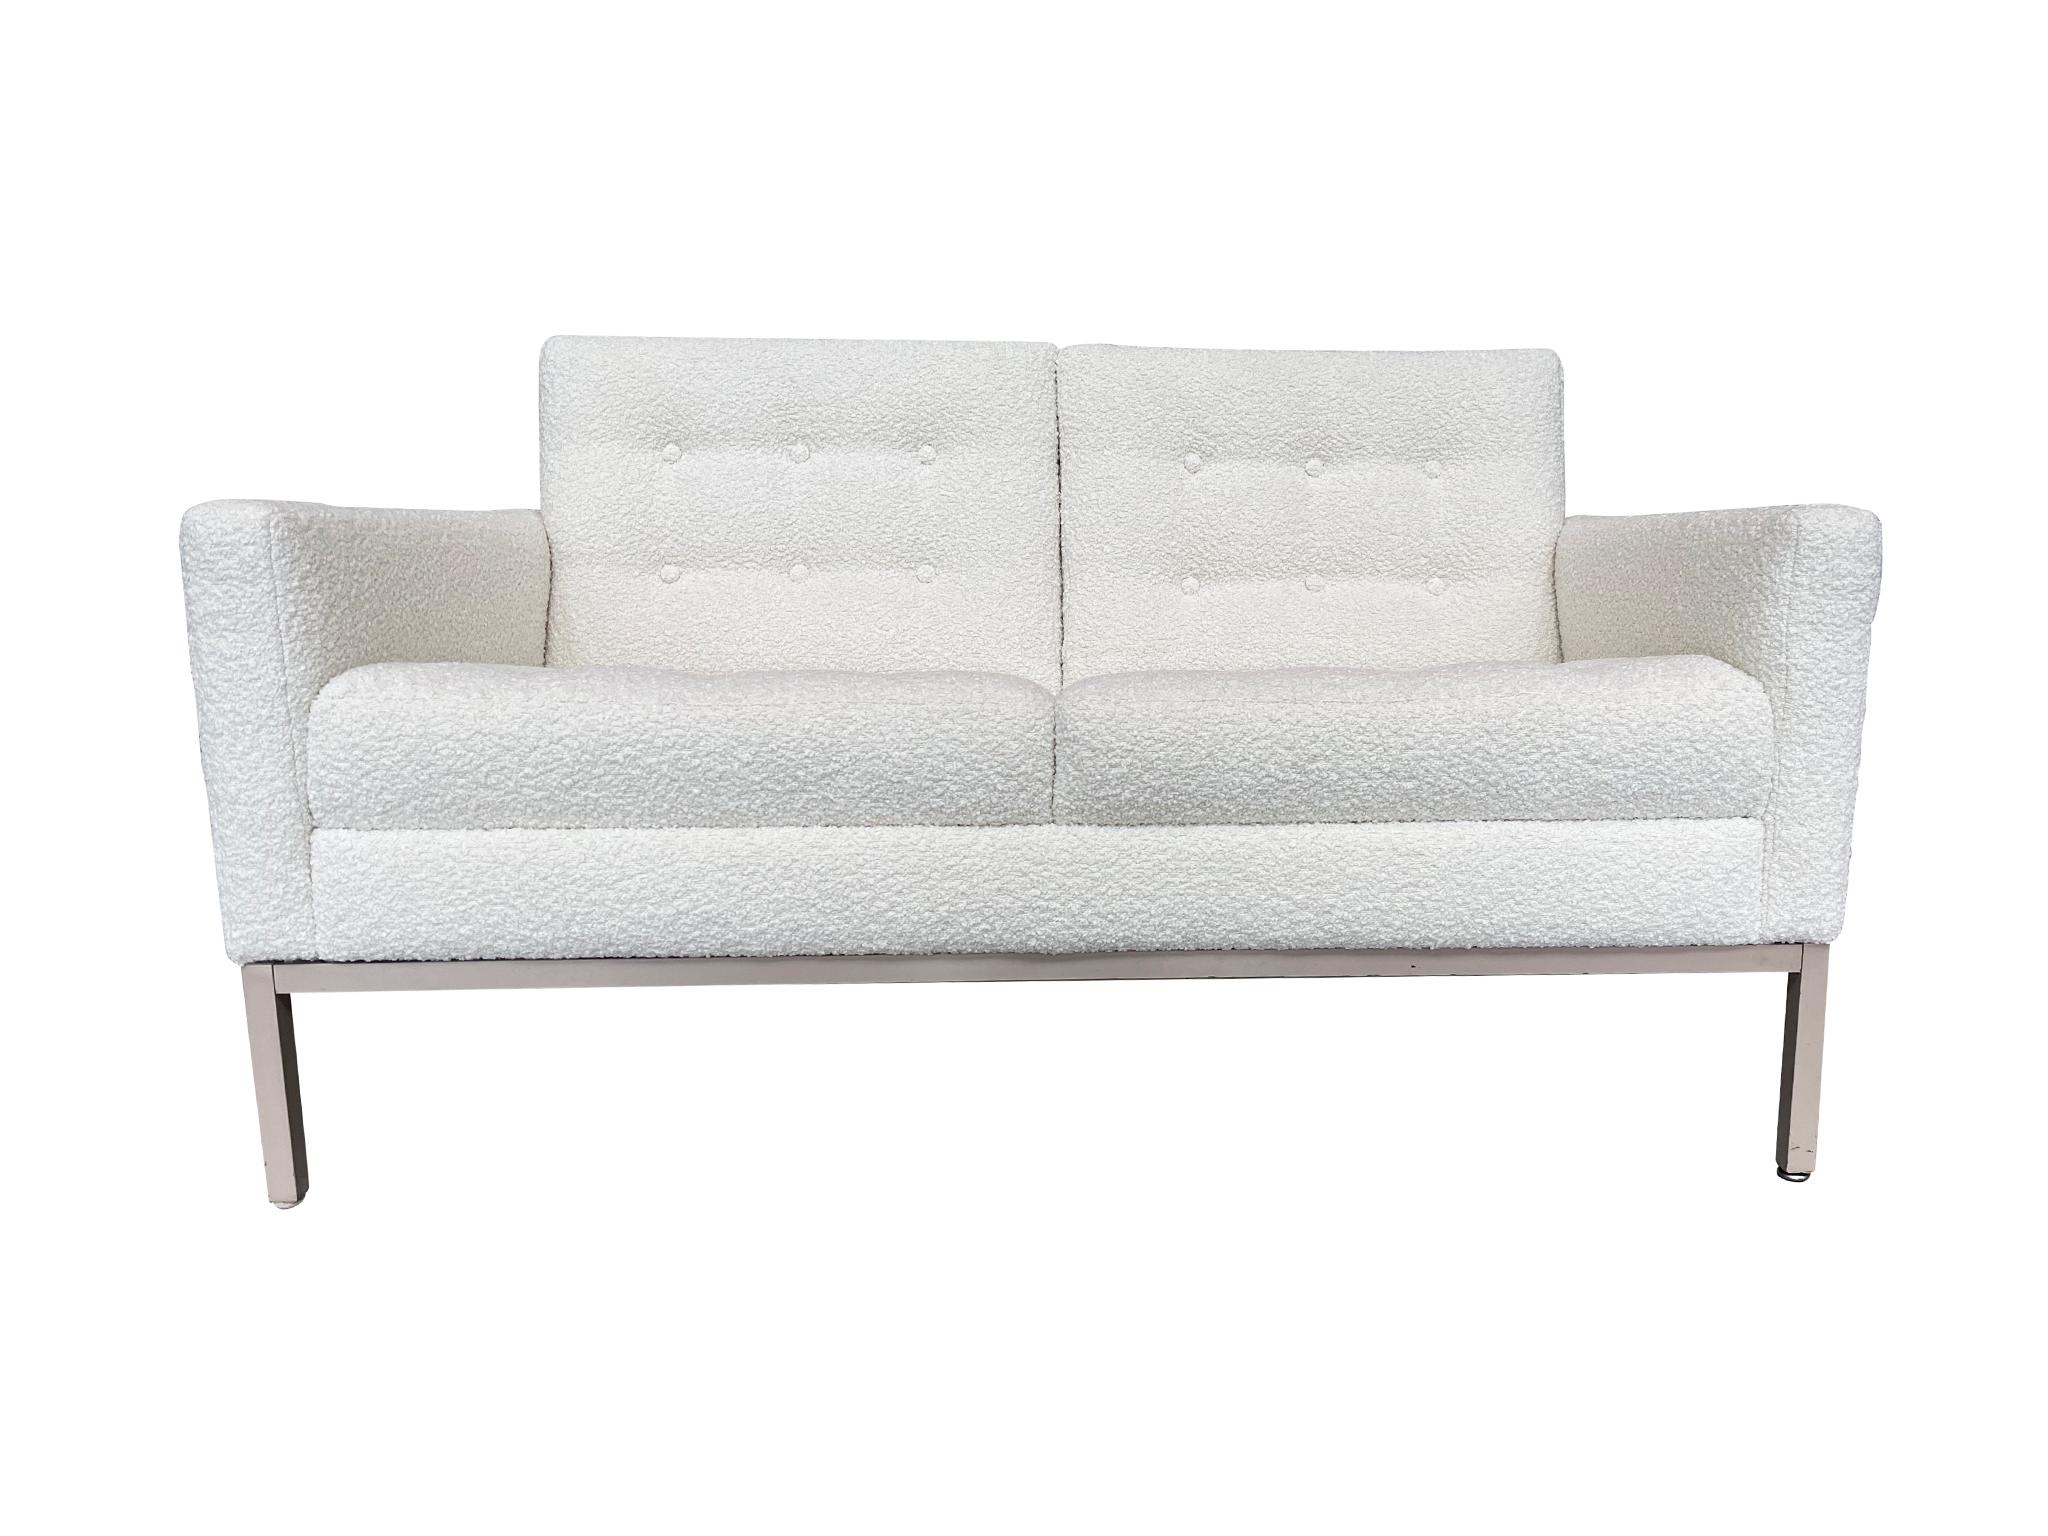 Originally made in the 1970s, this two-seater settee by Patrician Furniture Company takes after the iconic Florence Knoll sofa, with its combination of angular and soft lines. The settee has been newly reupholstered in white chenille with button